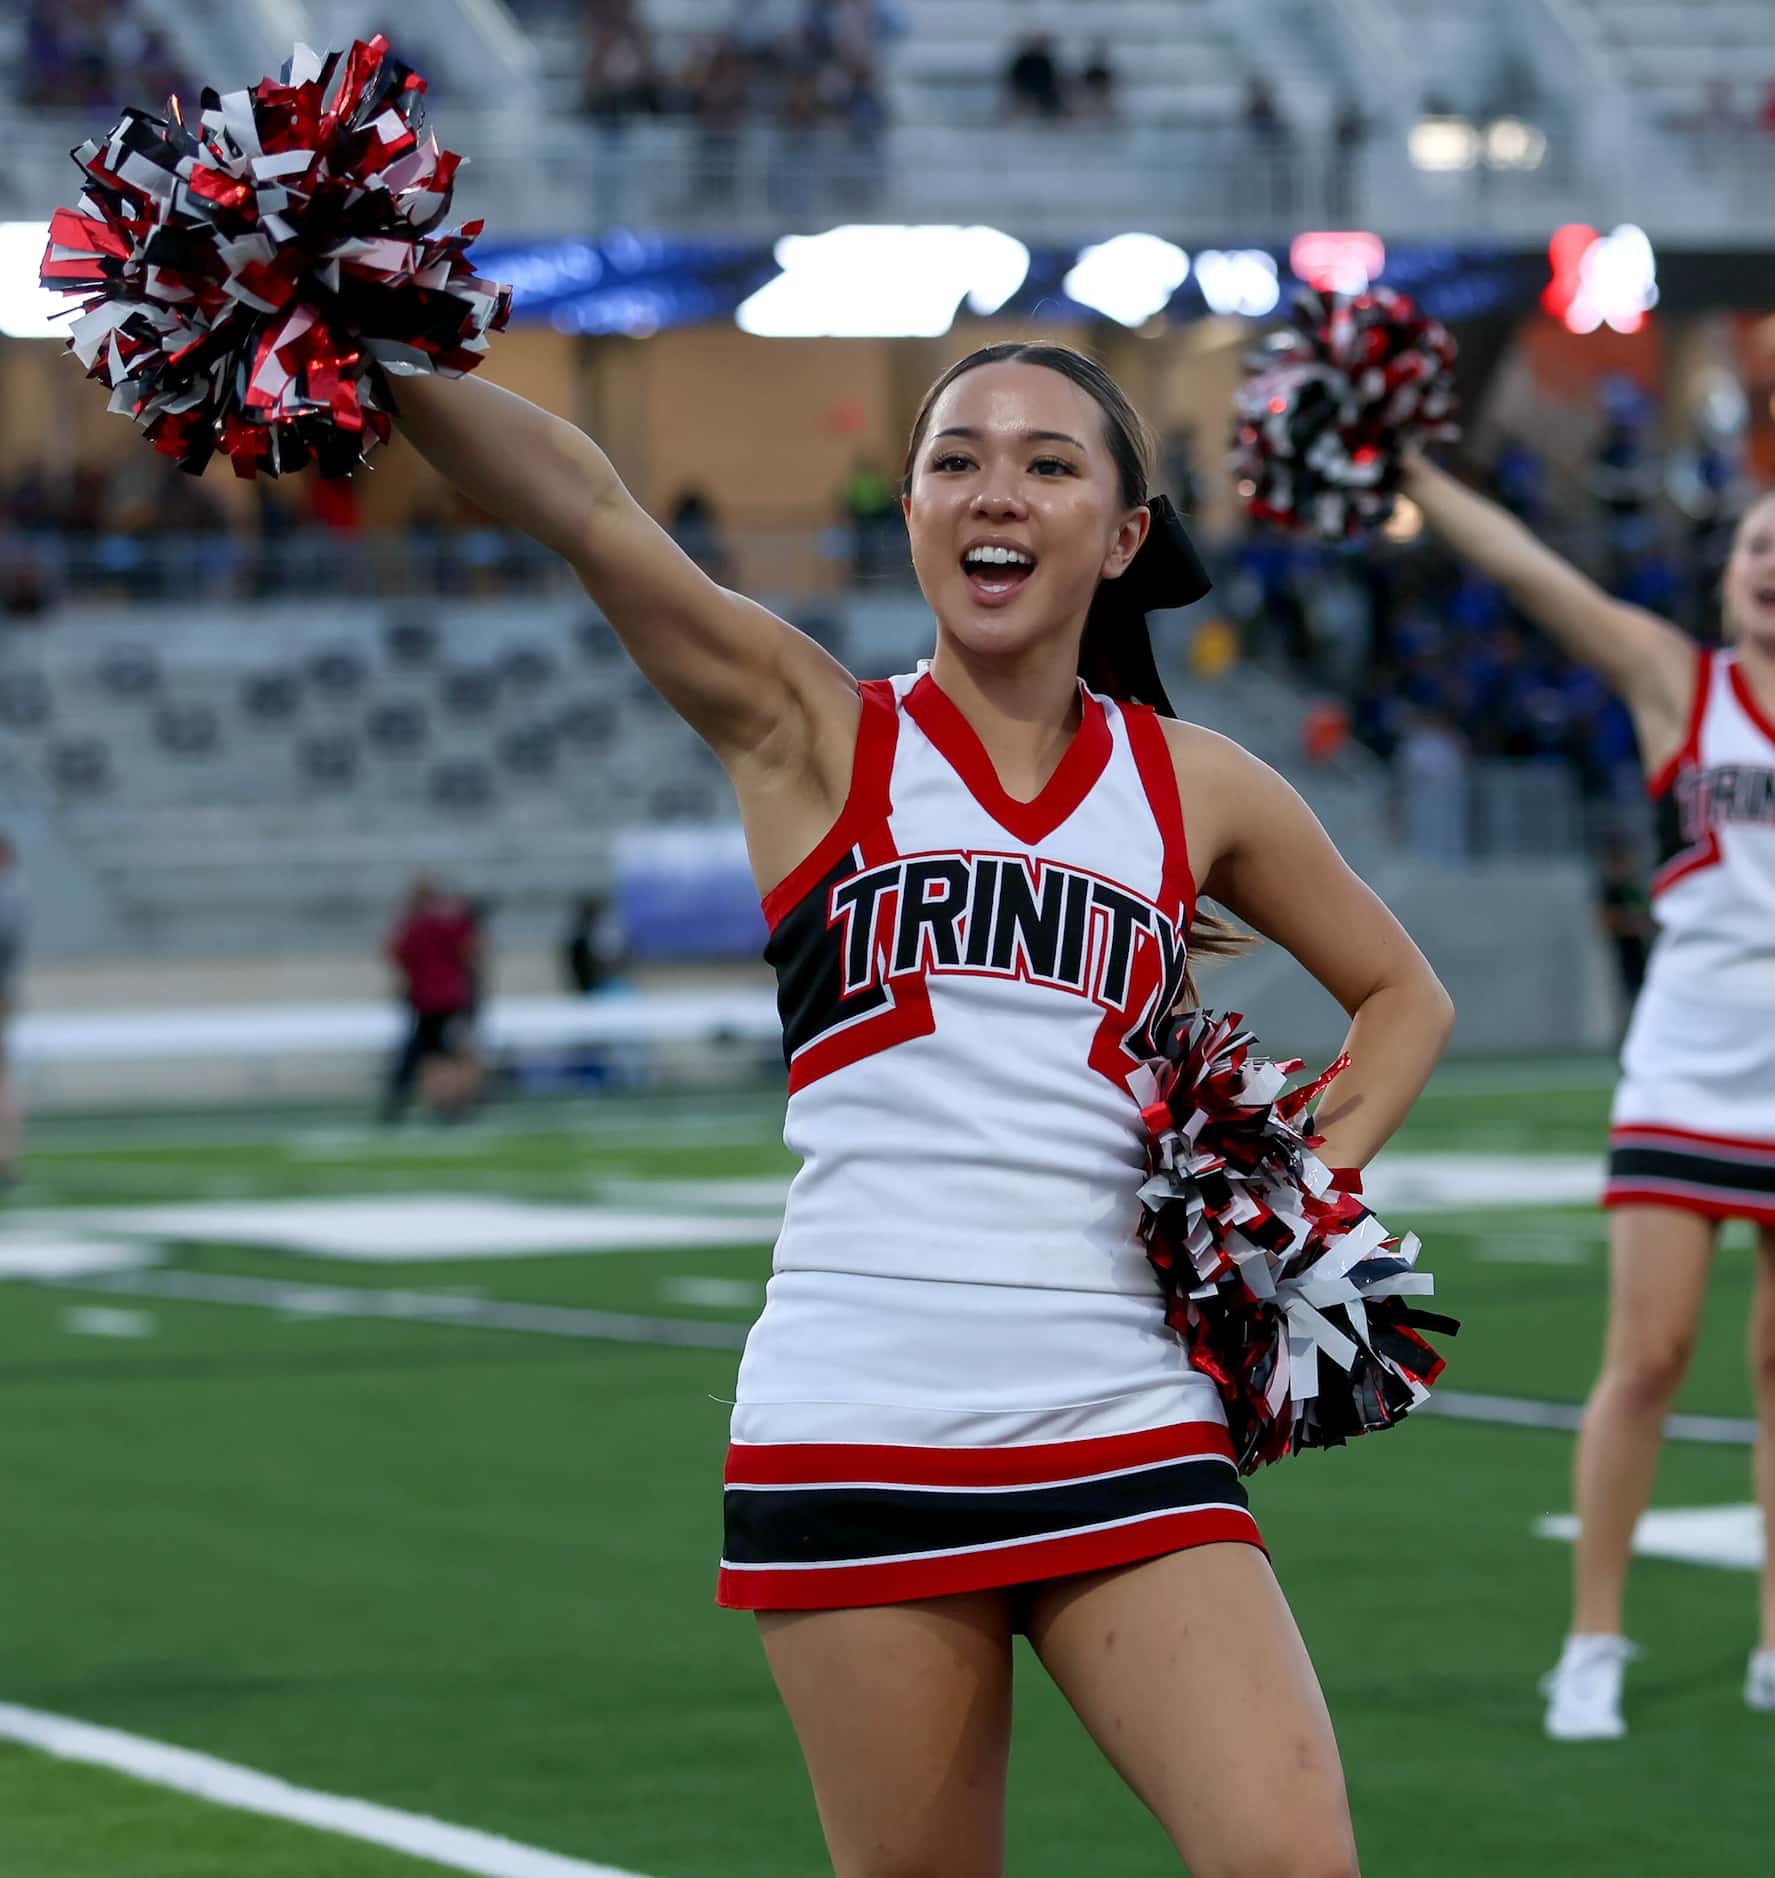 The North Crowley Panthers face Euless Trinity Trojans in a high school football game on...